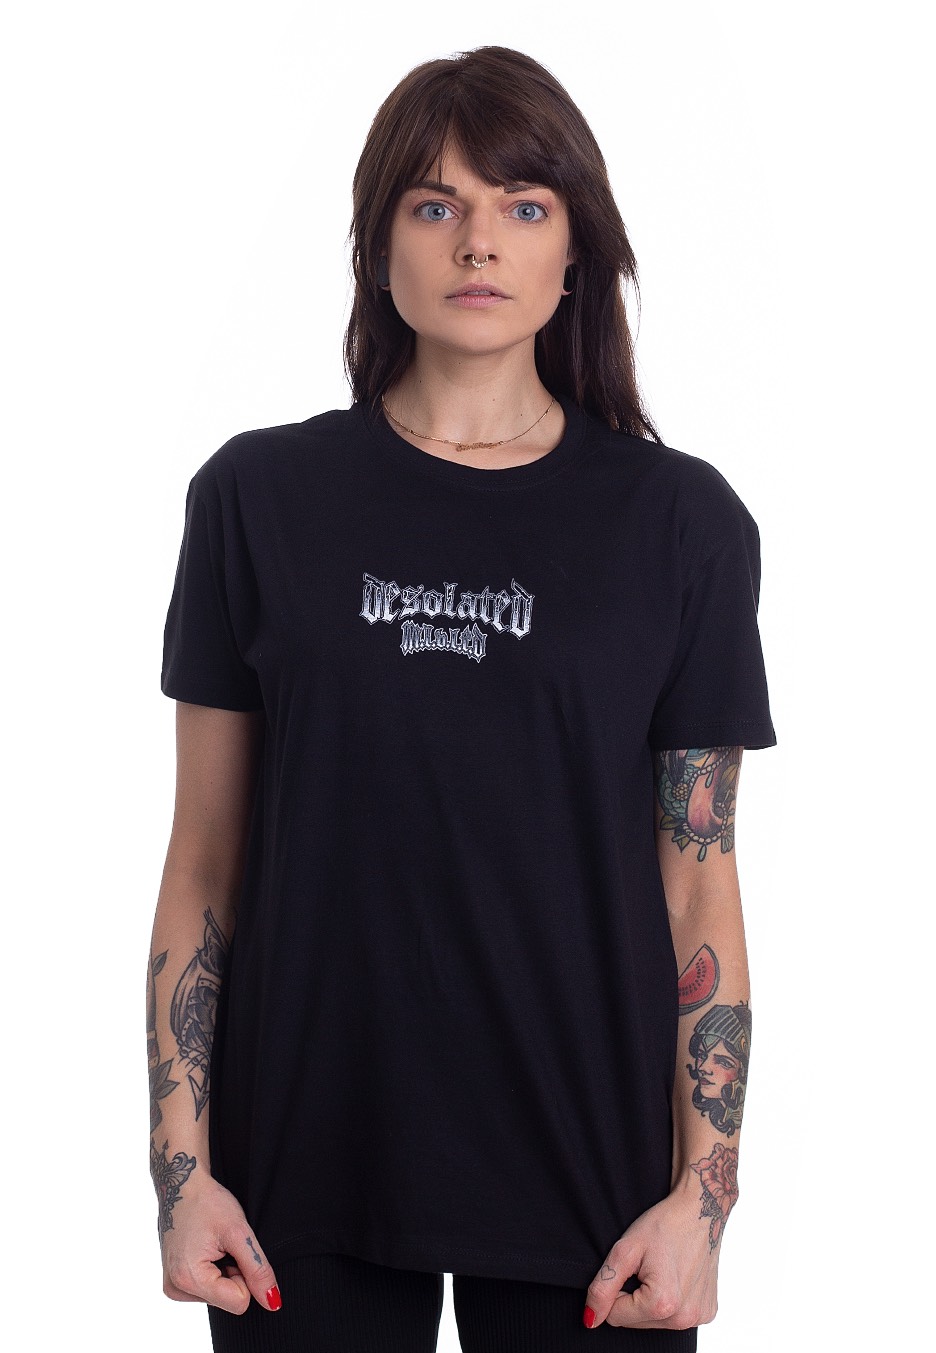 Desolated - New Realm Of Misery - - T-Shirts